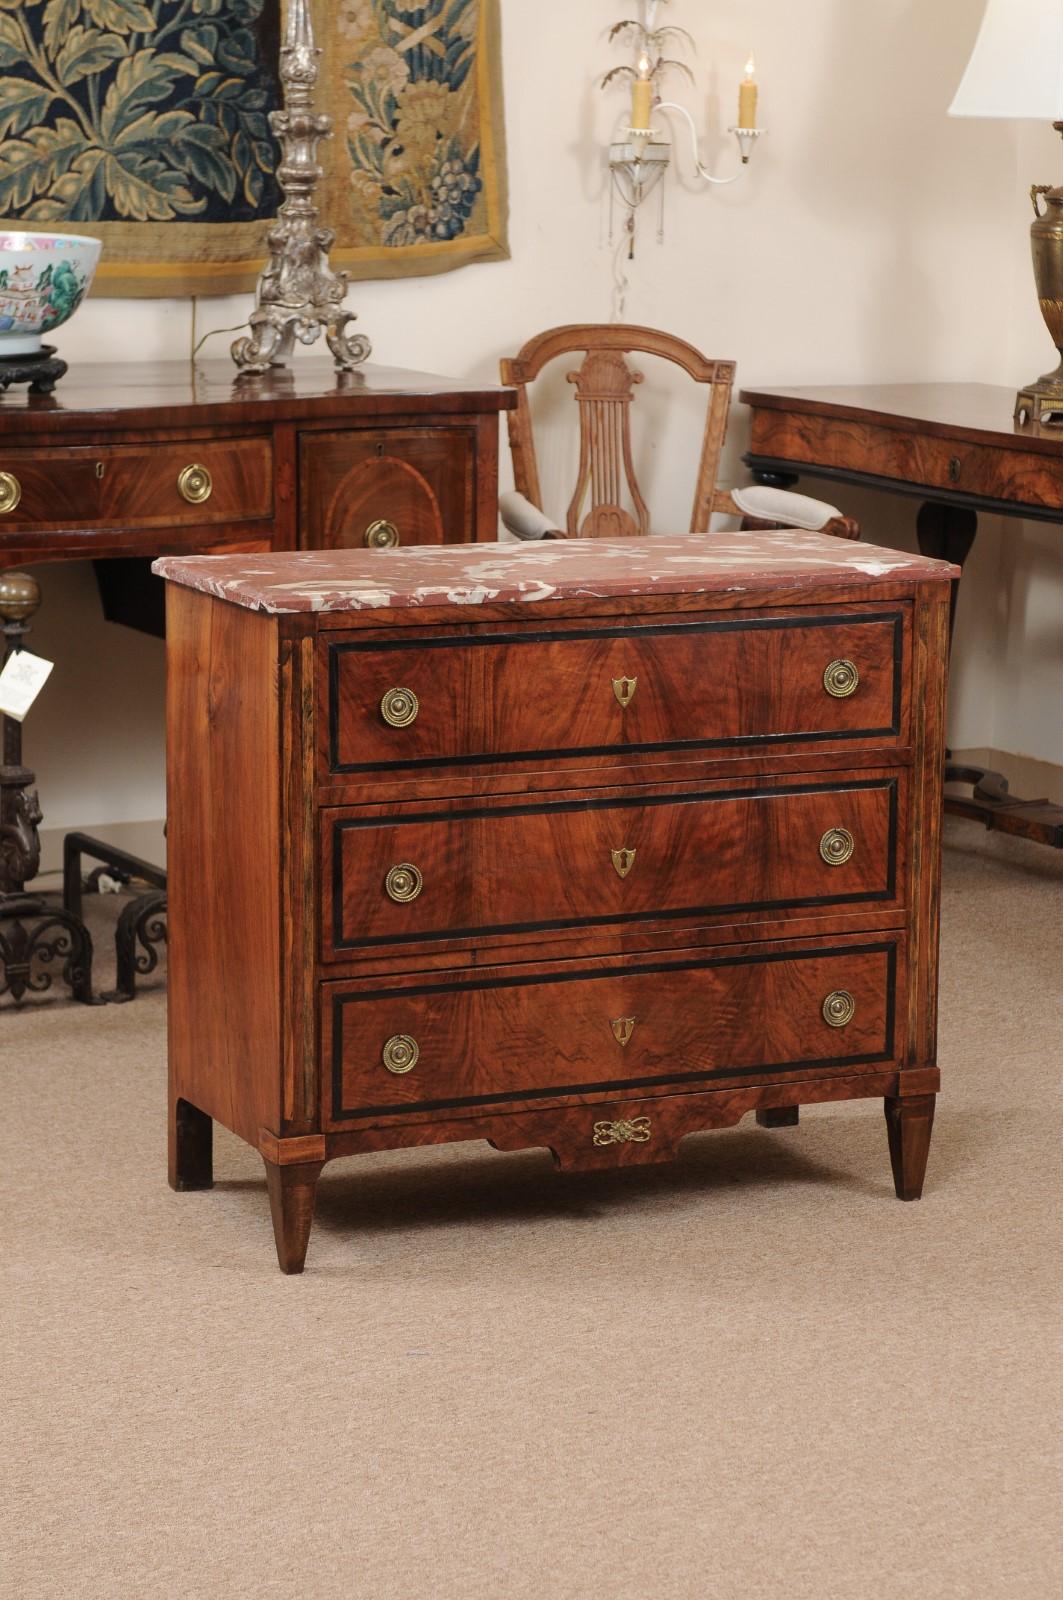 A 19th Century Dutch Neoclassical Walnut Commode with unique Red Marble Top. Striking woodgrain and inlay on each of its three drawers. This piece features brass ring pulls, brass faux keyhole mounts and a decorative apron with tapered front legs.